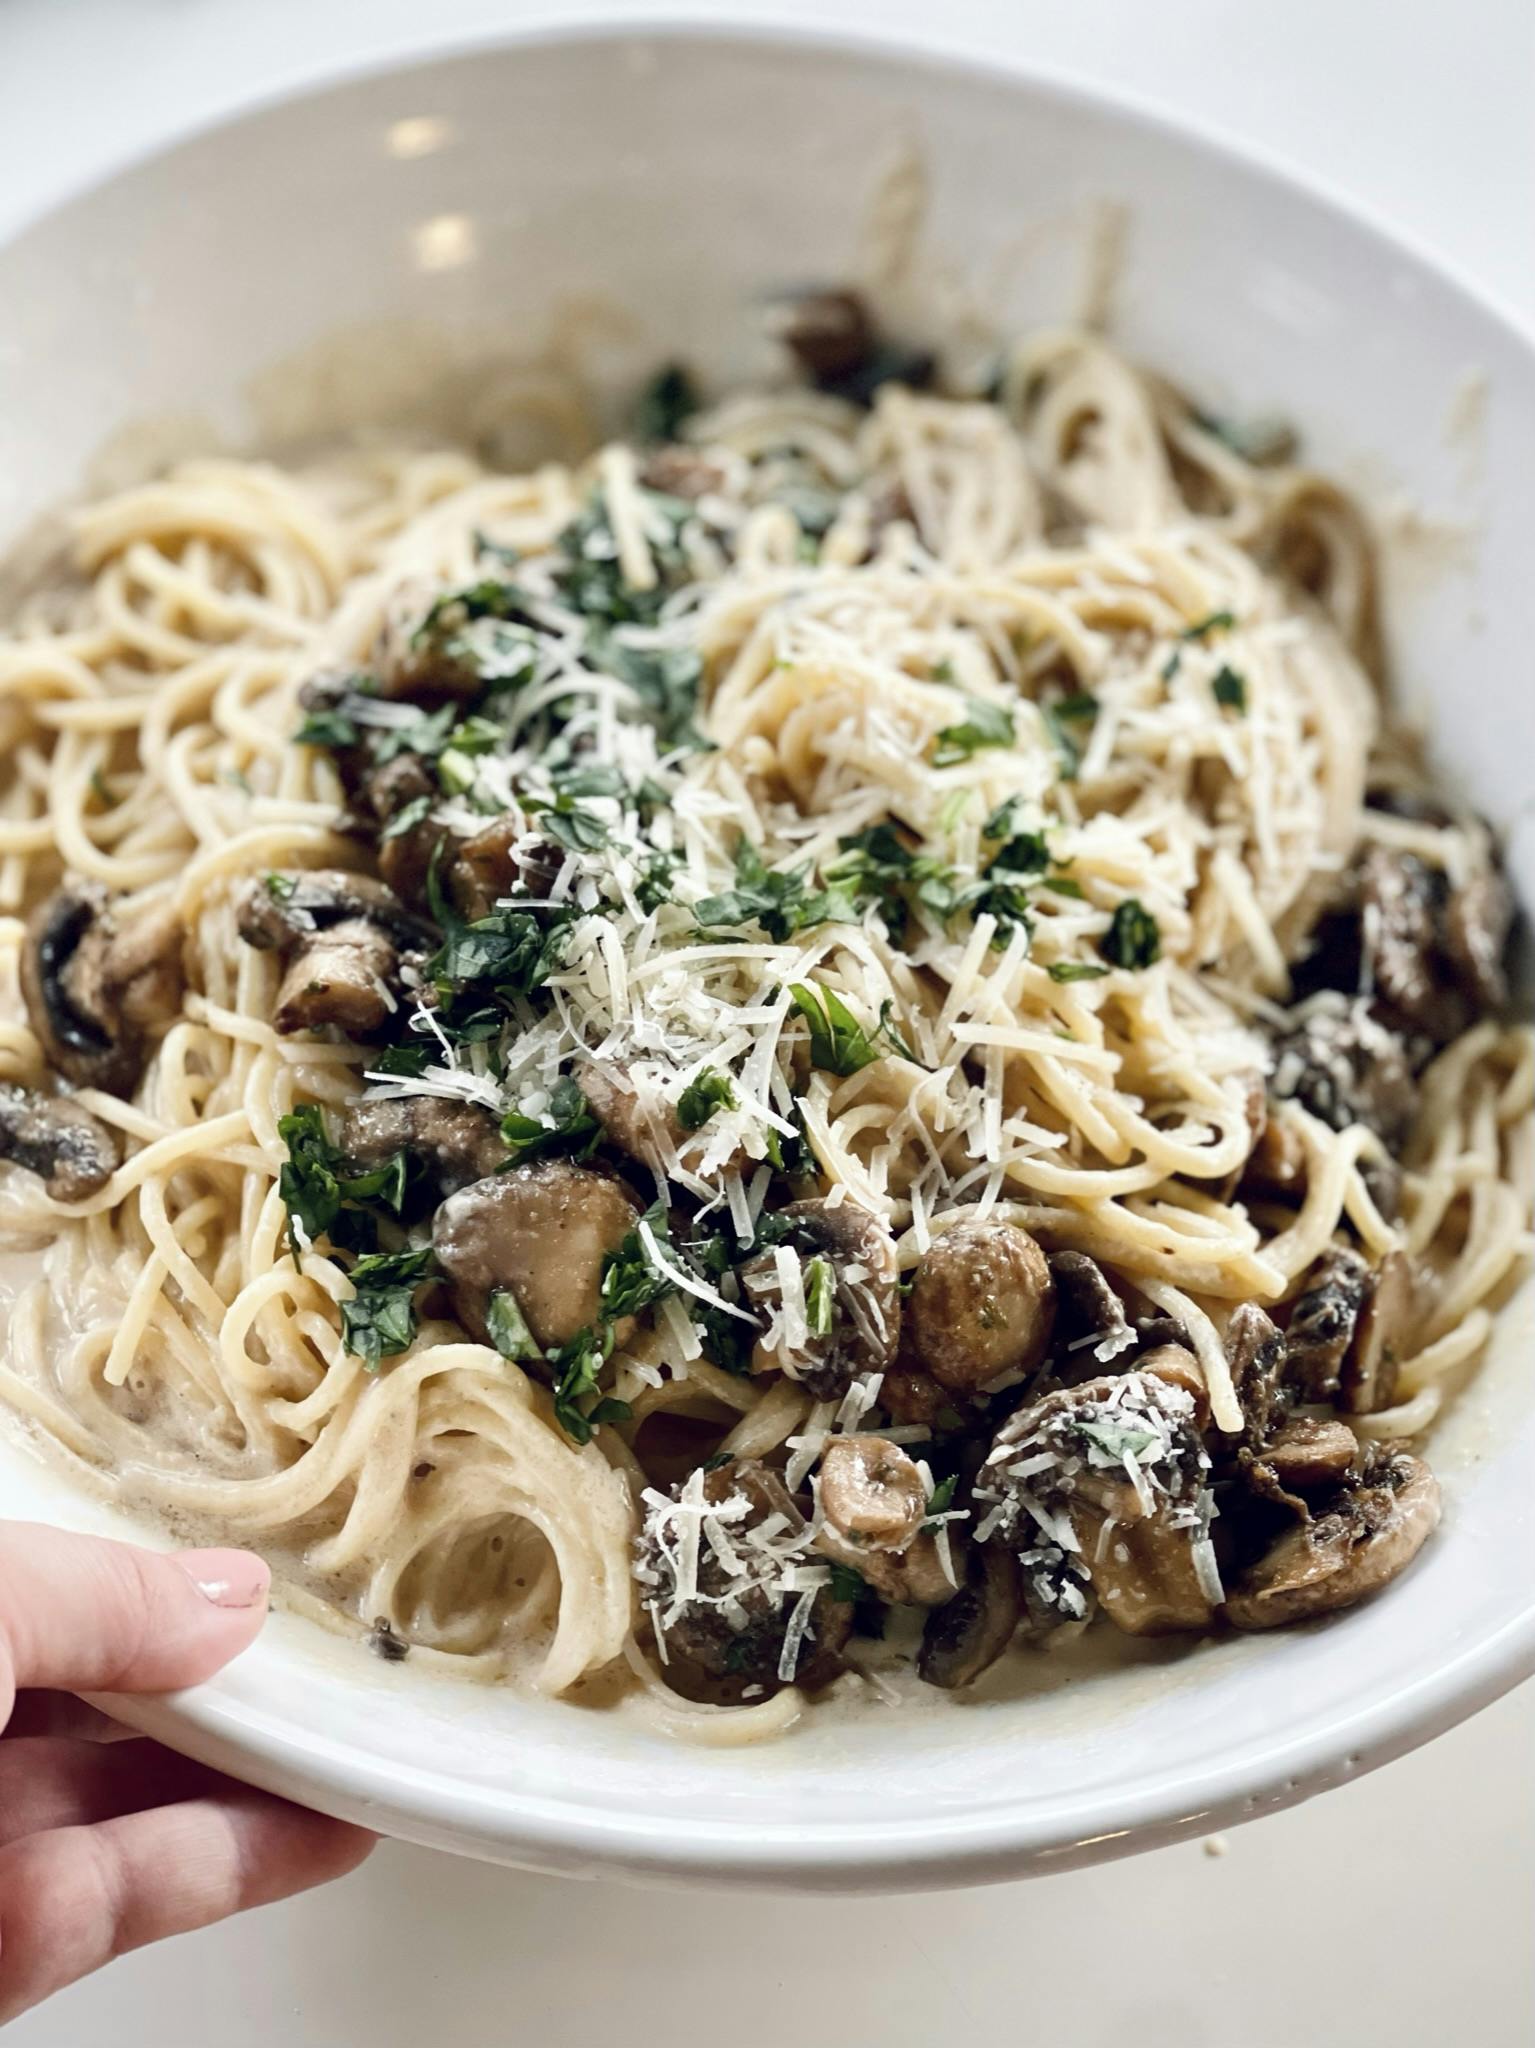 Picture for Garlicky Spaghetti Alfredo with Mushrooms